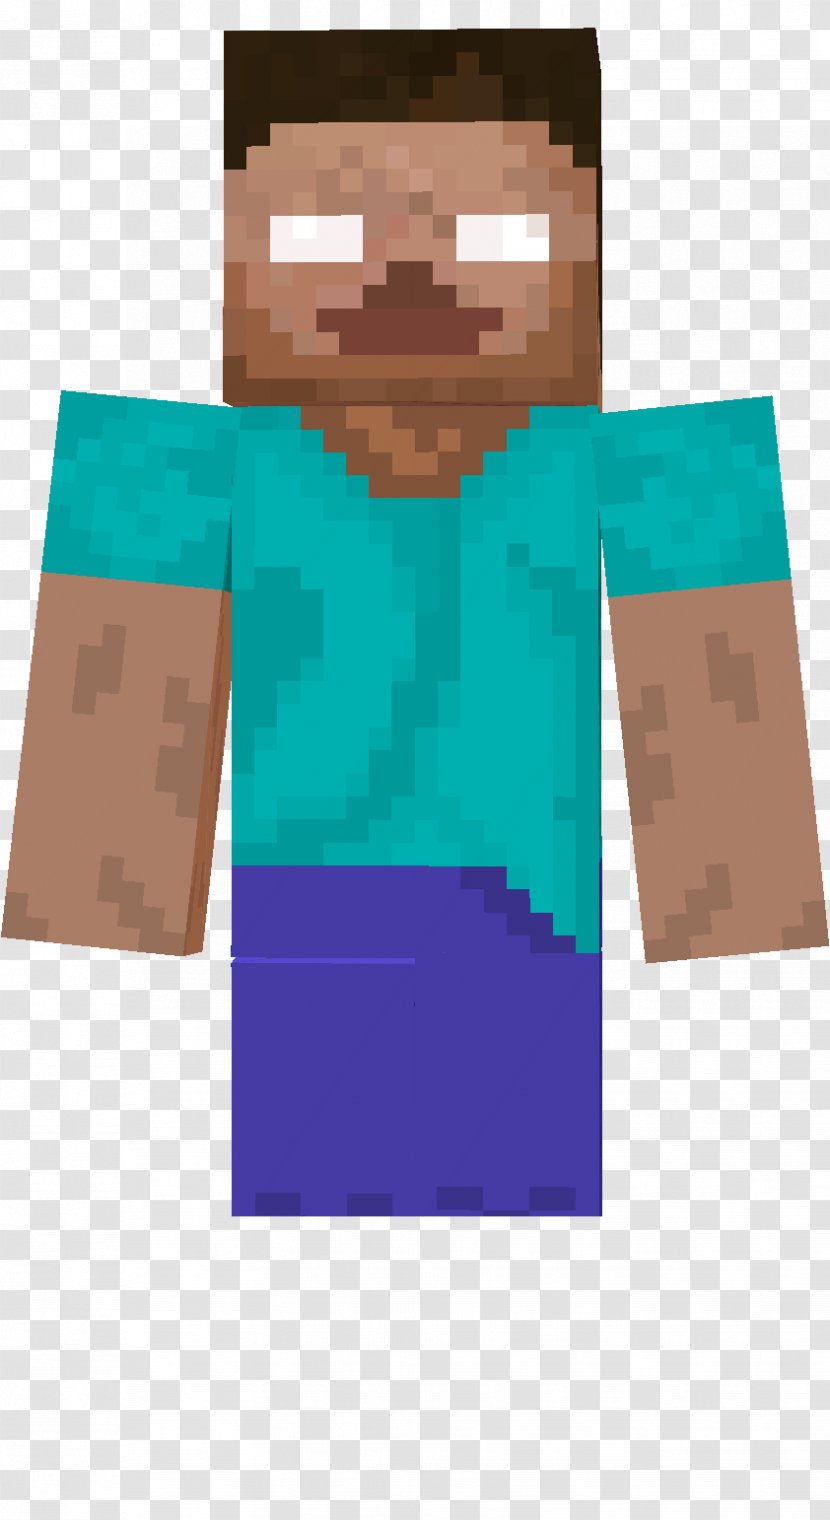 Minecraft Pocket Edition Roblox Herobrine Xbox 360 Mojang Minecraft Transparent Png - you download roblox on xbox 360